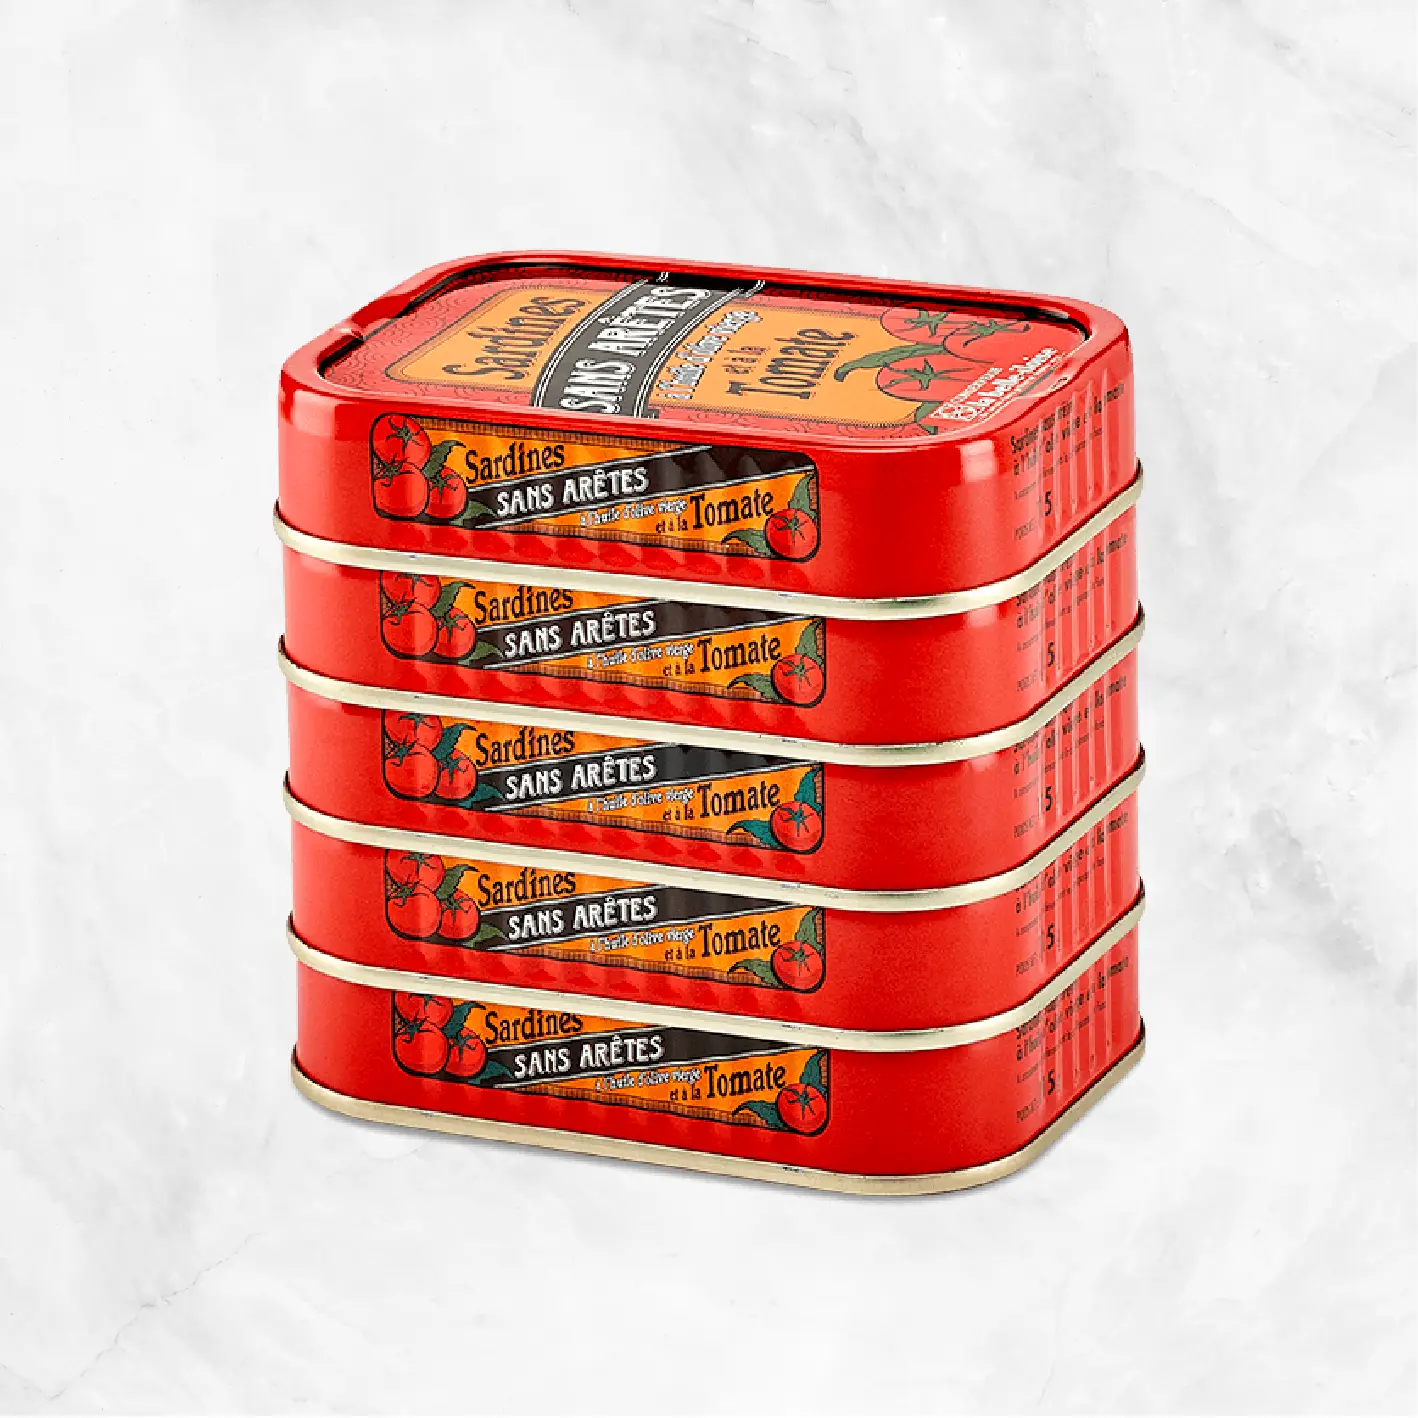 Boneless Sardines with Olive Oil & Tomato Delivery